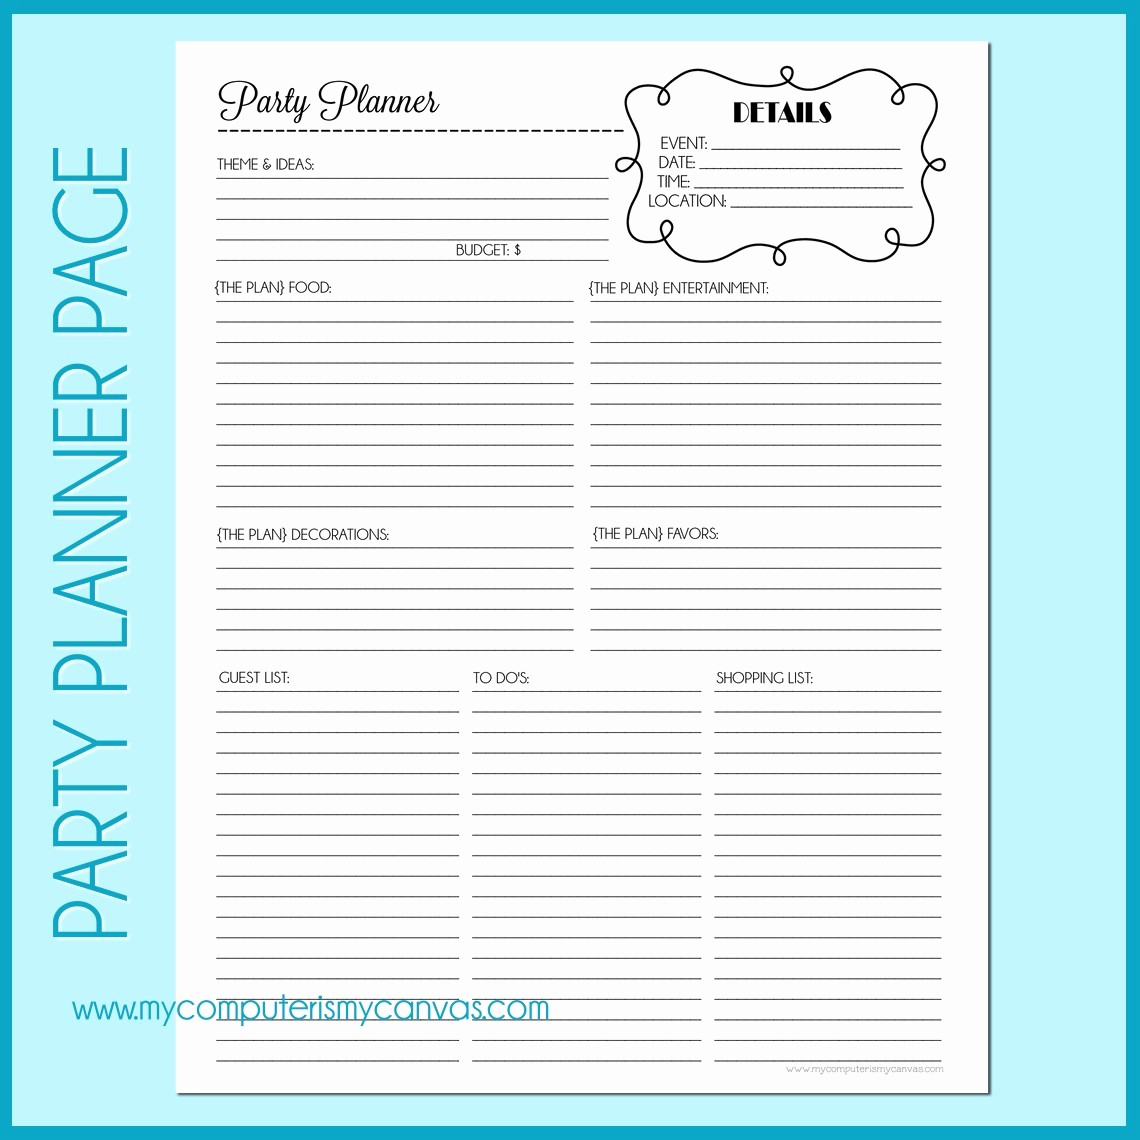 Party Planner Checklist Template Free Lovely 5 Best Of Party event Printable Planner Party